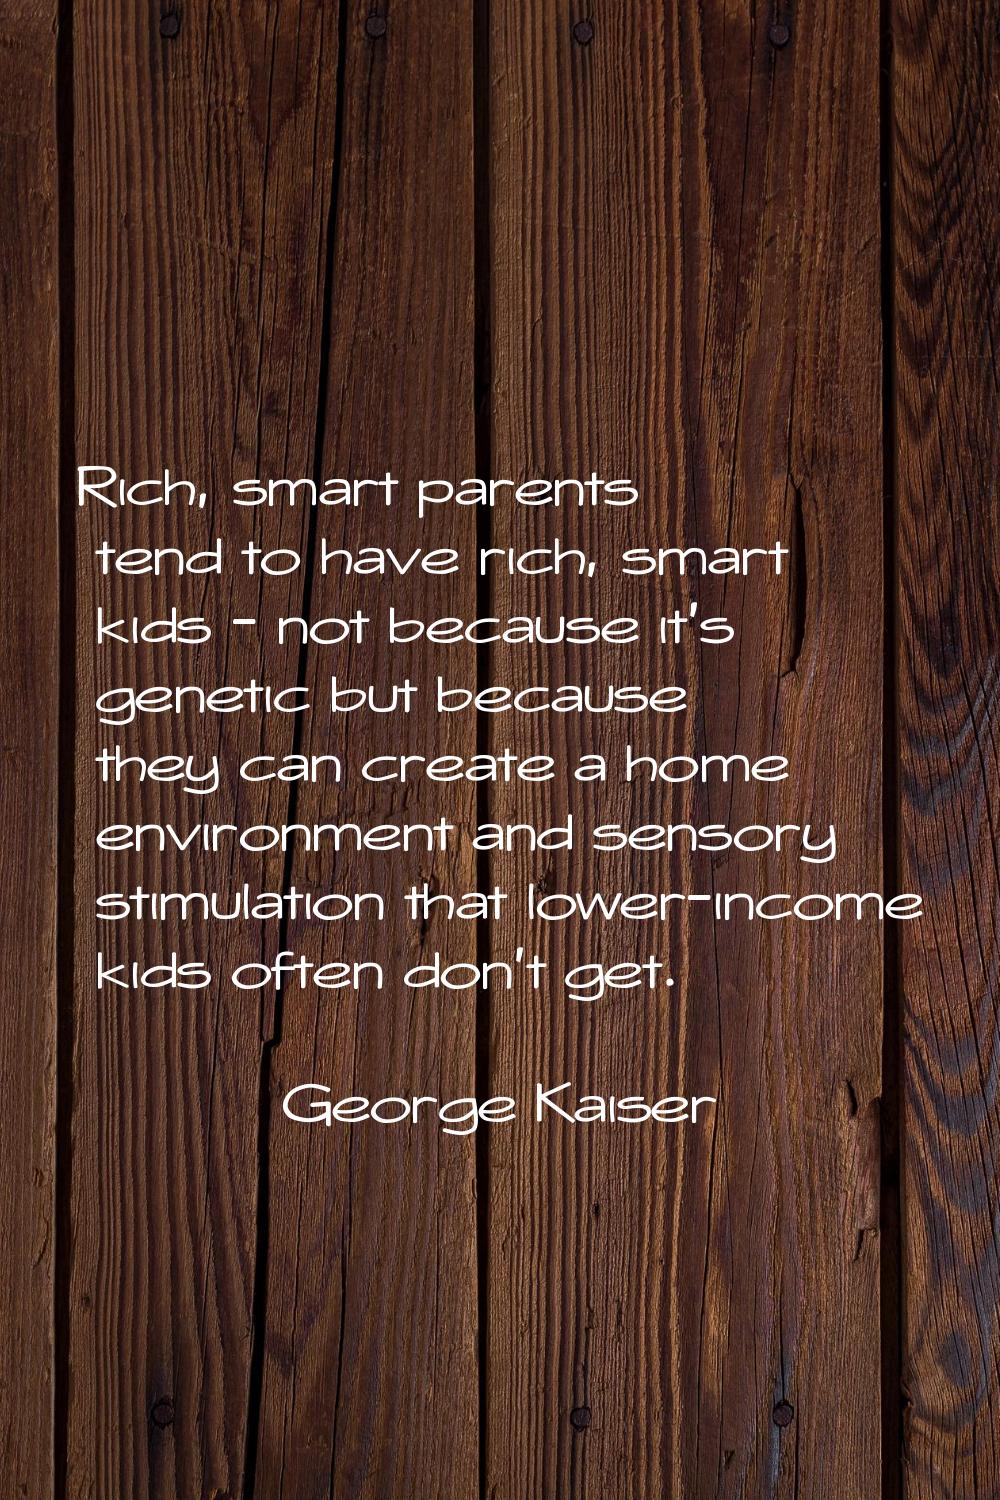 Rich, smart parents tend to have rich, smart kids - not because it's genetic but because they can c